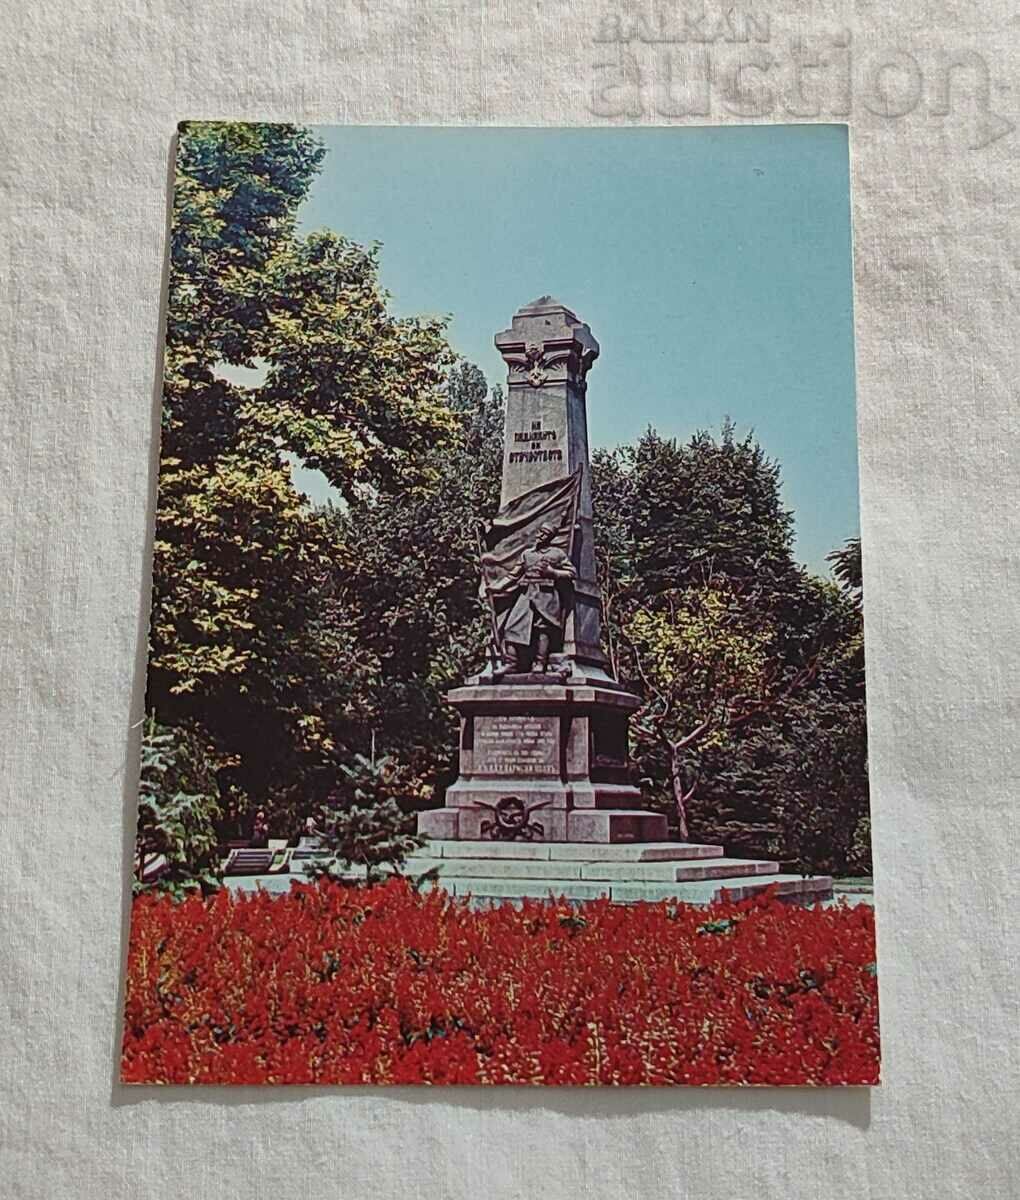 RUSE MONUMENT TO THE DEAD IN THE WARS P.K. 1980